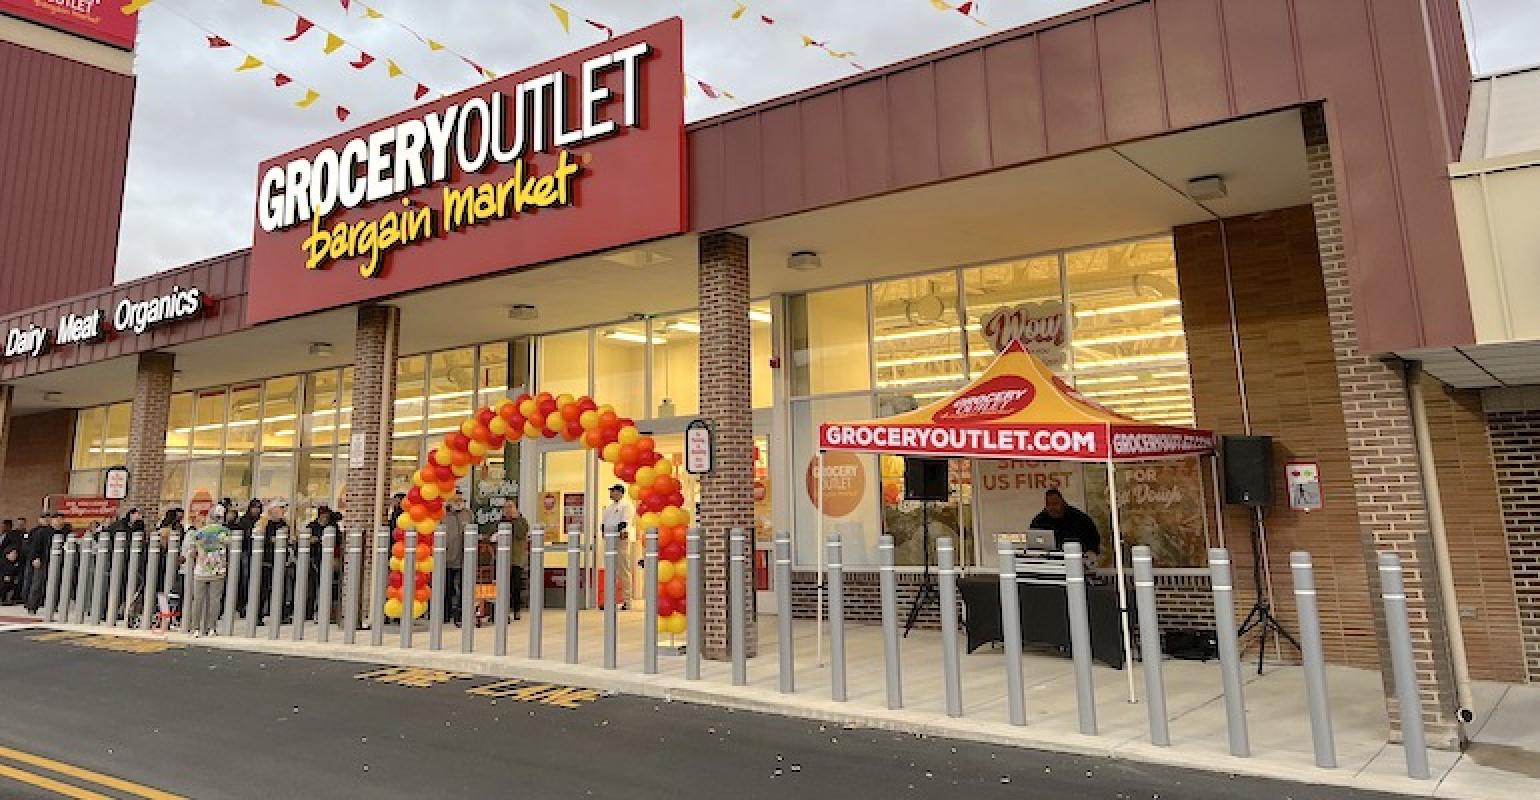 Grocery Outlet Bargain Market will hold grand opening in Fontana on Oct. 19, Business